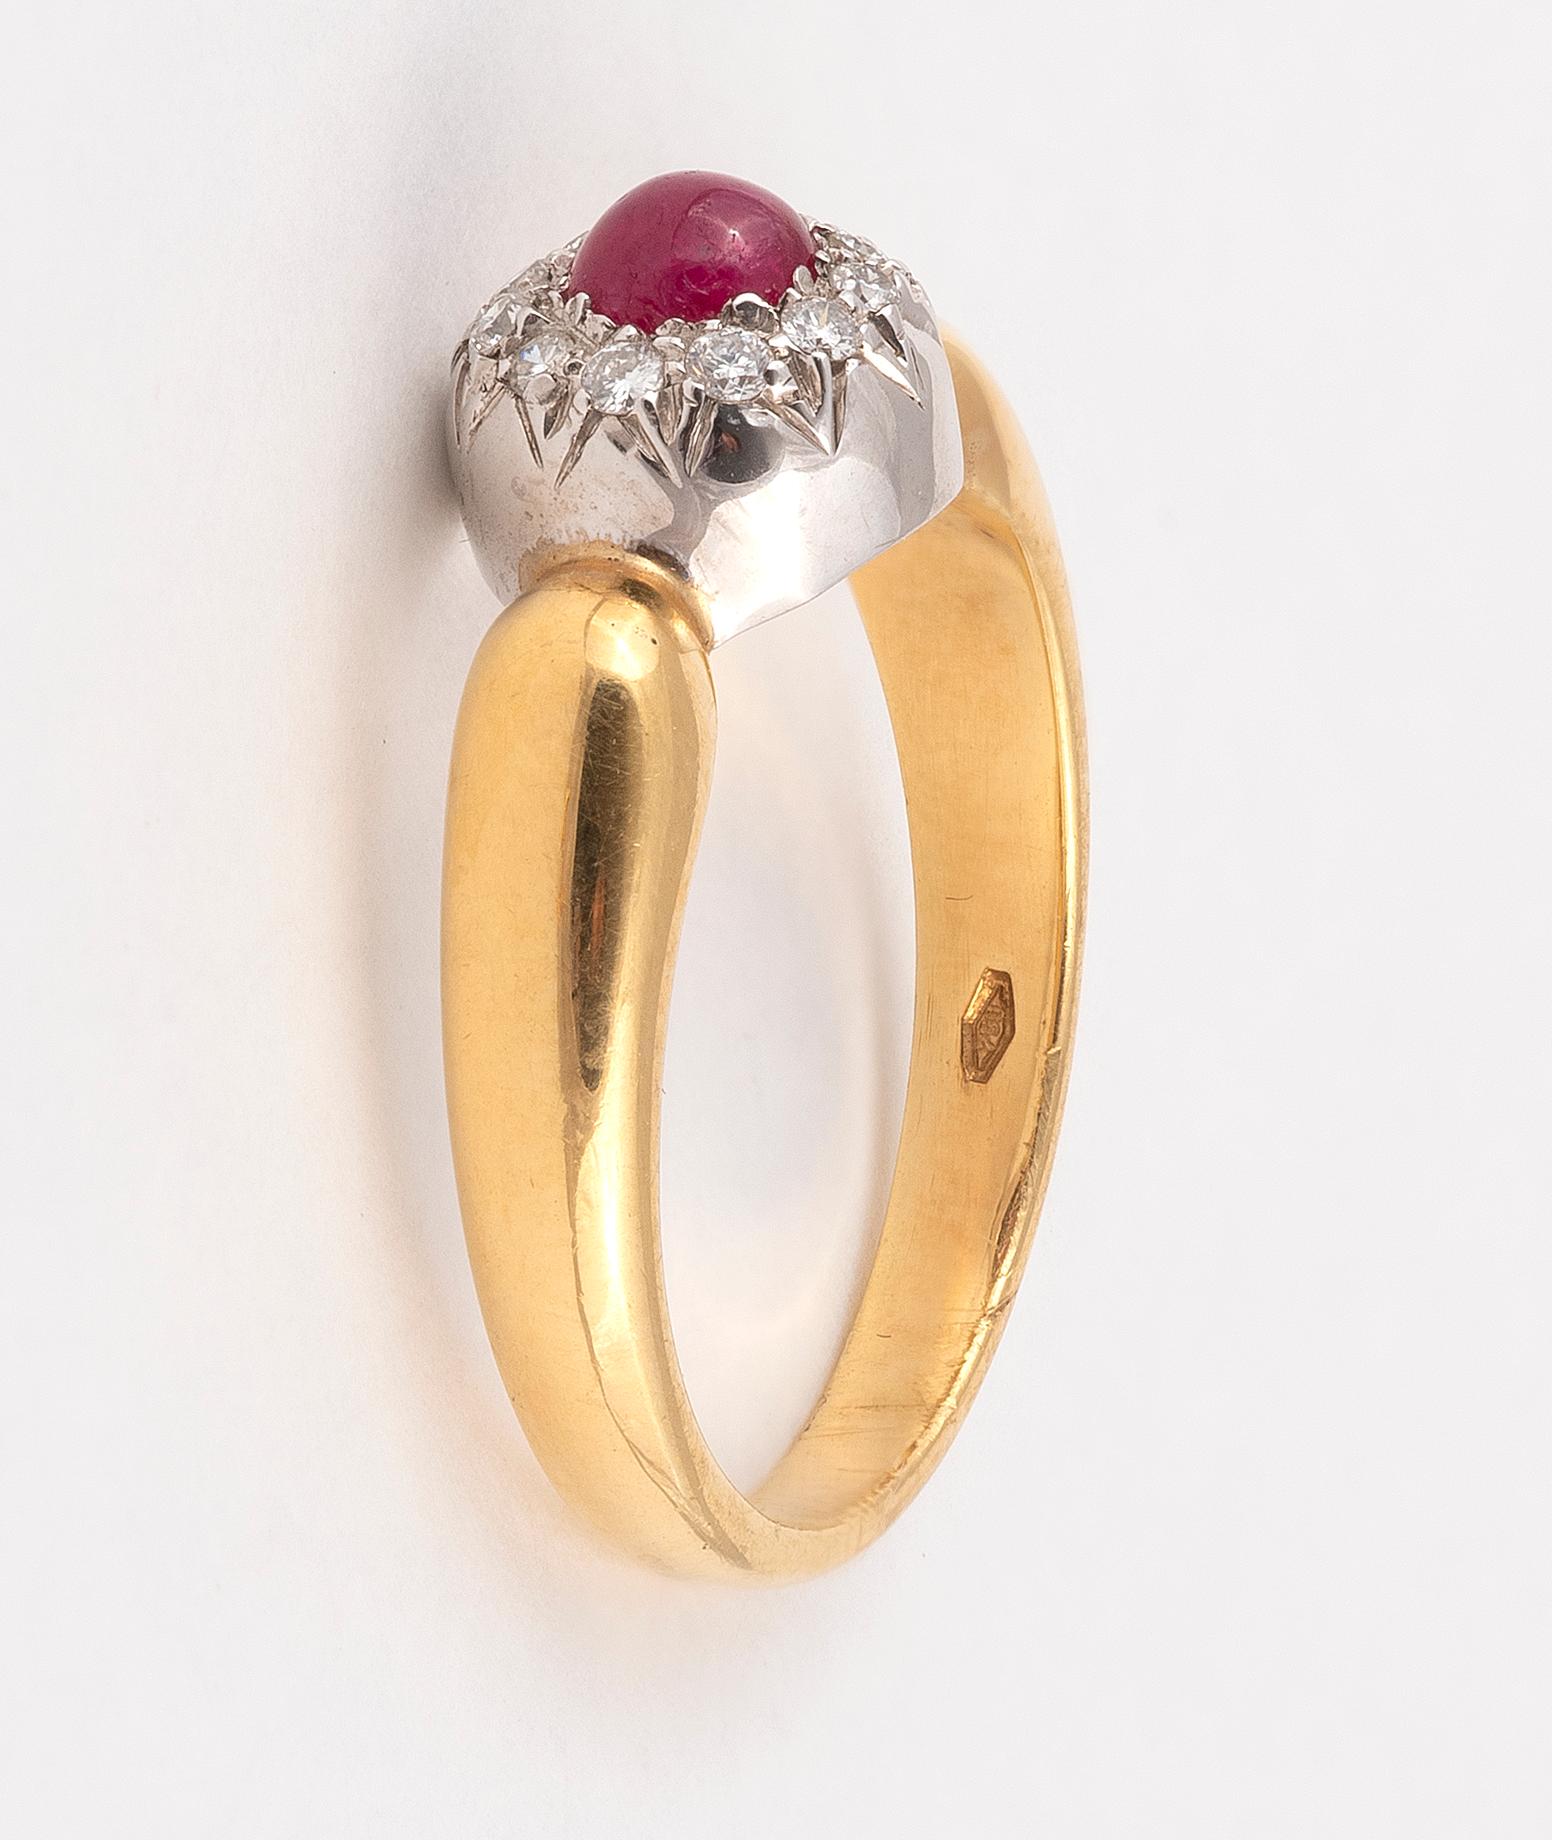 
Cabochon ruby and diamond cluster ring
Size: 7

